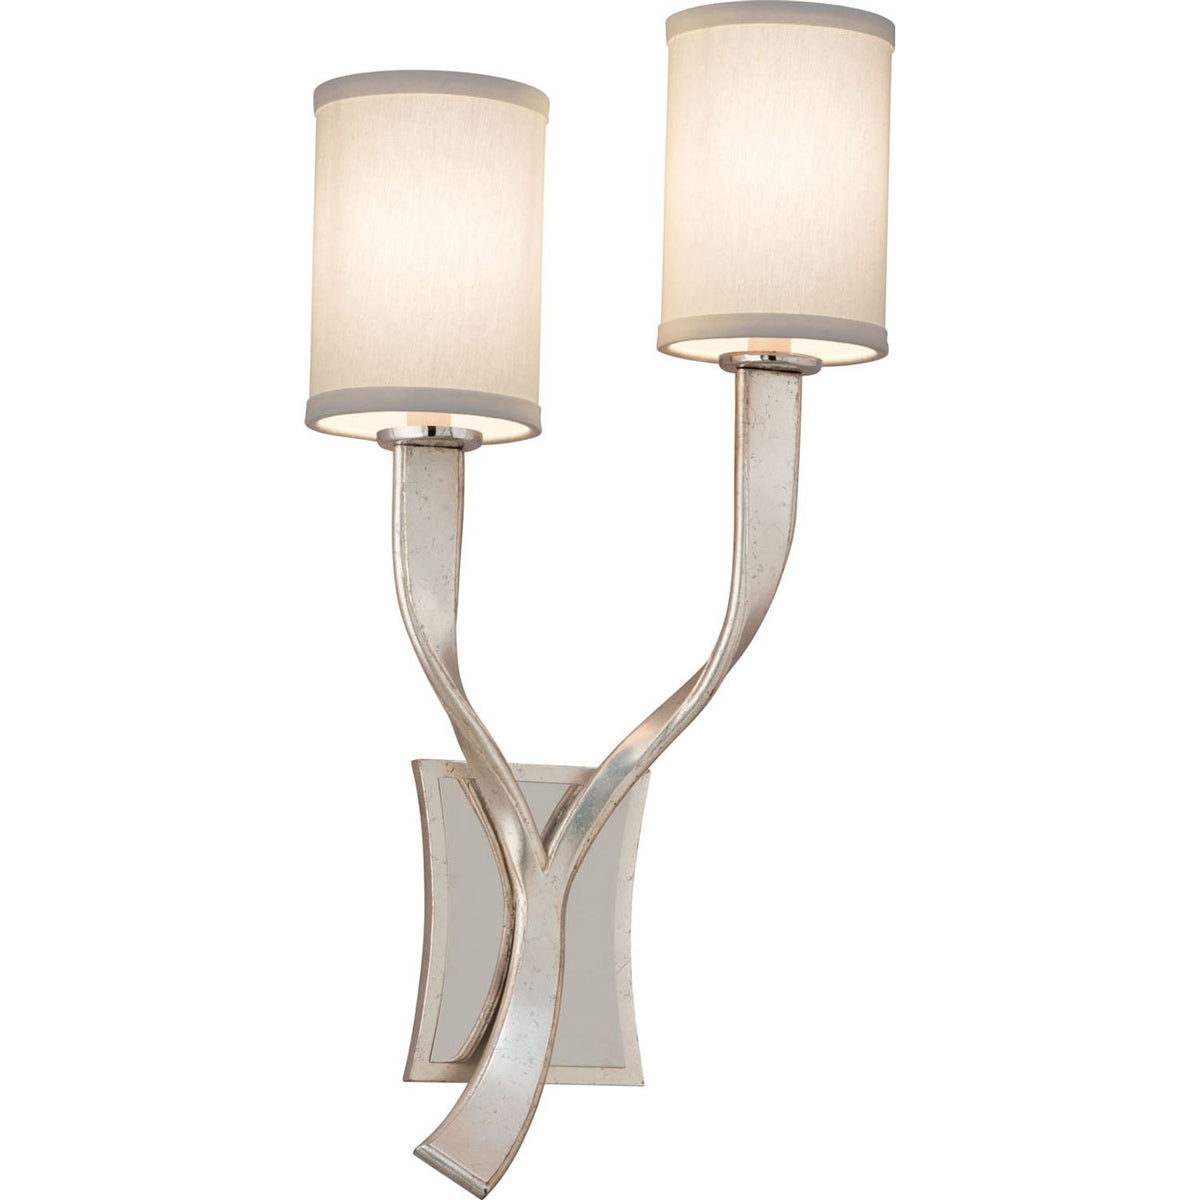 Corbett Lighting - 158-11 - Two Light Wall Sconce - Roxy - Modern Silver With Polished Stainless